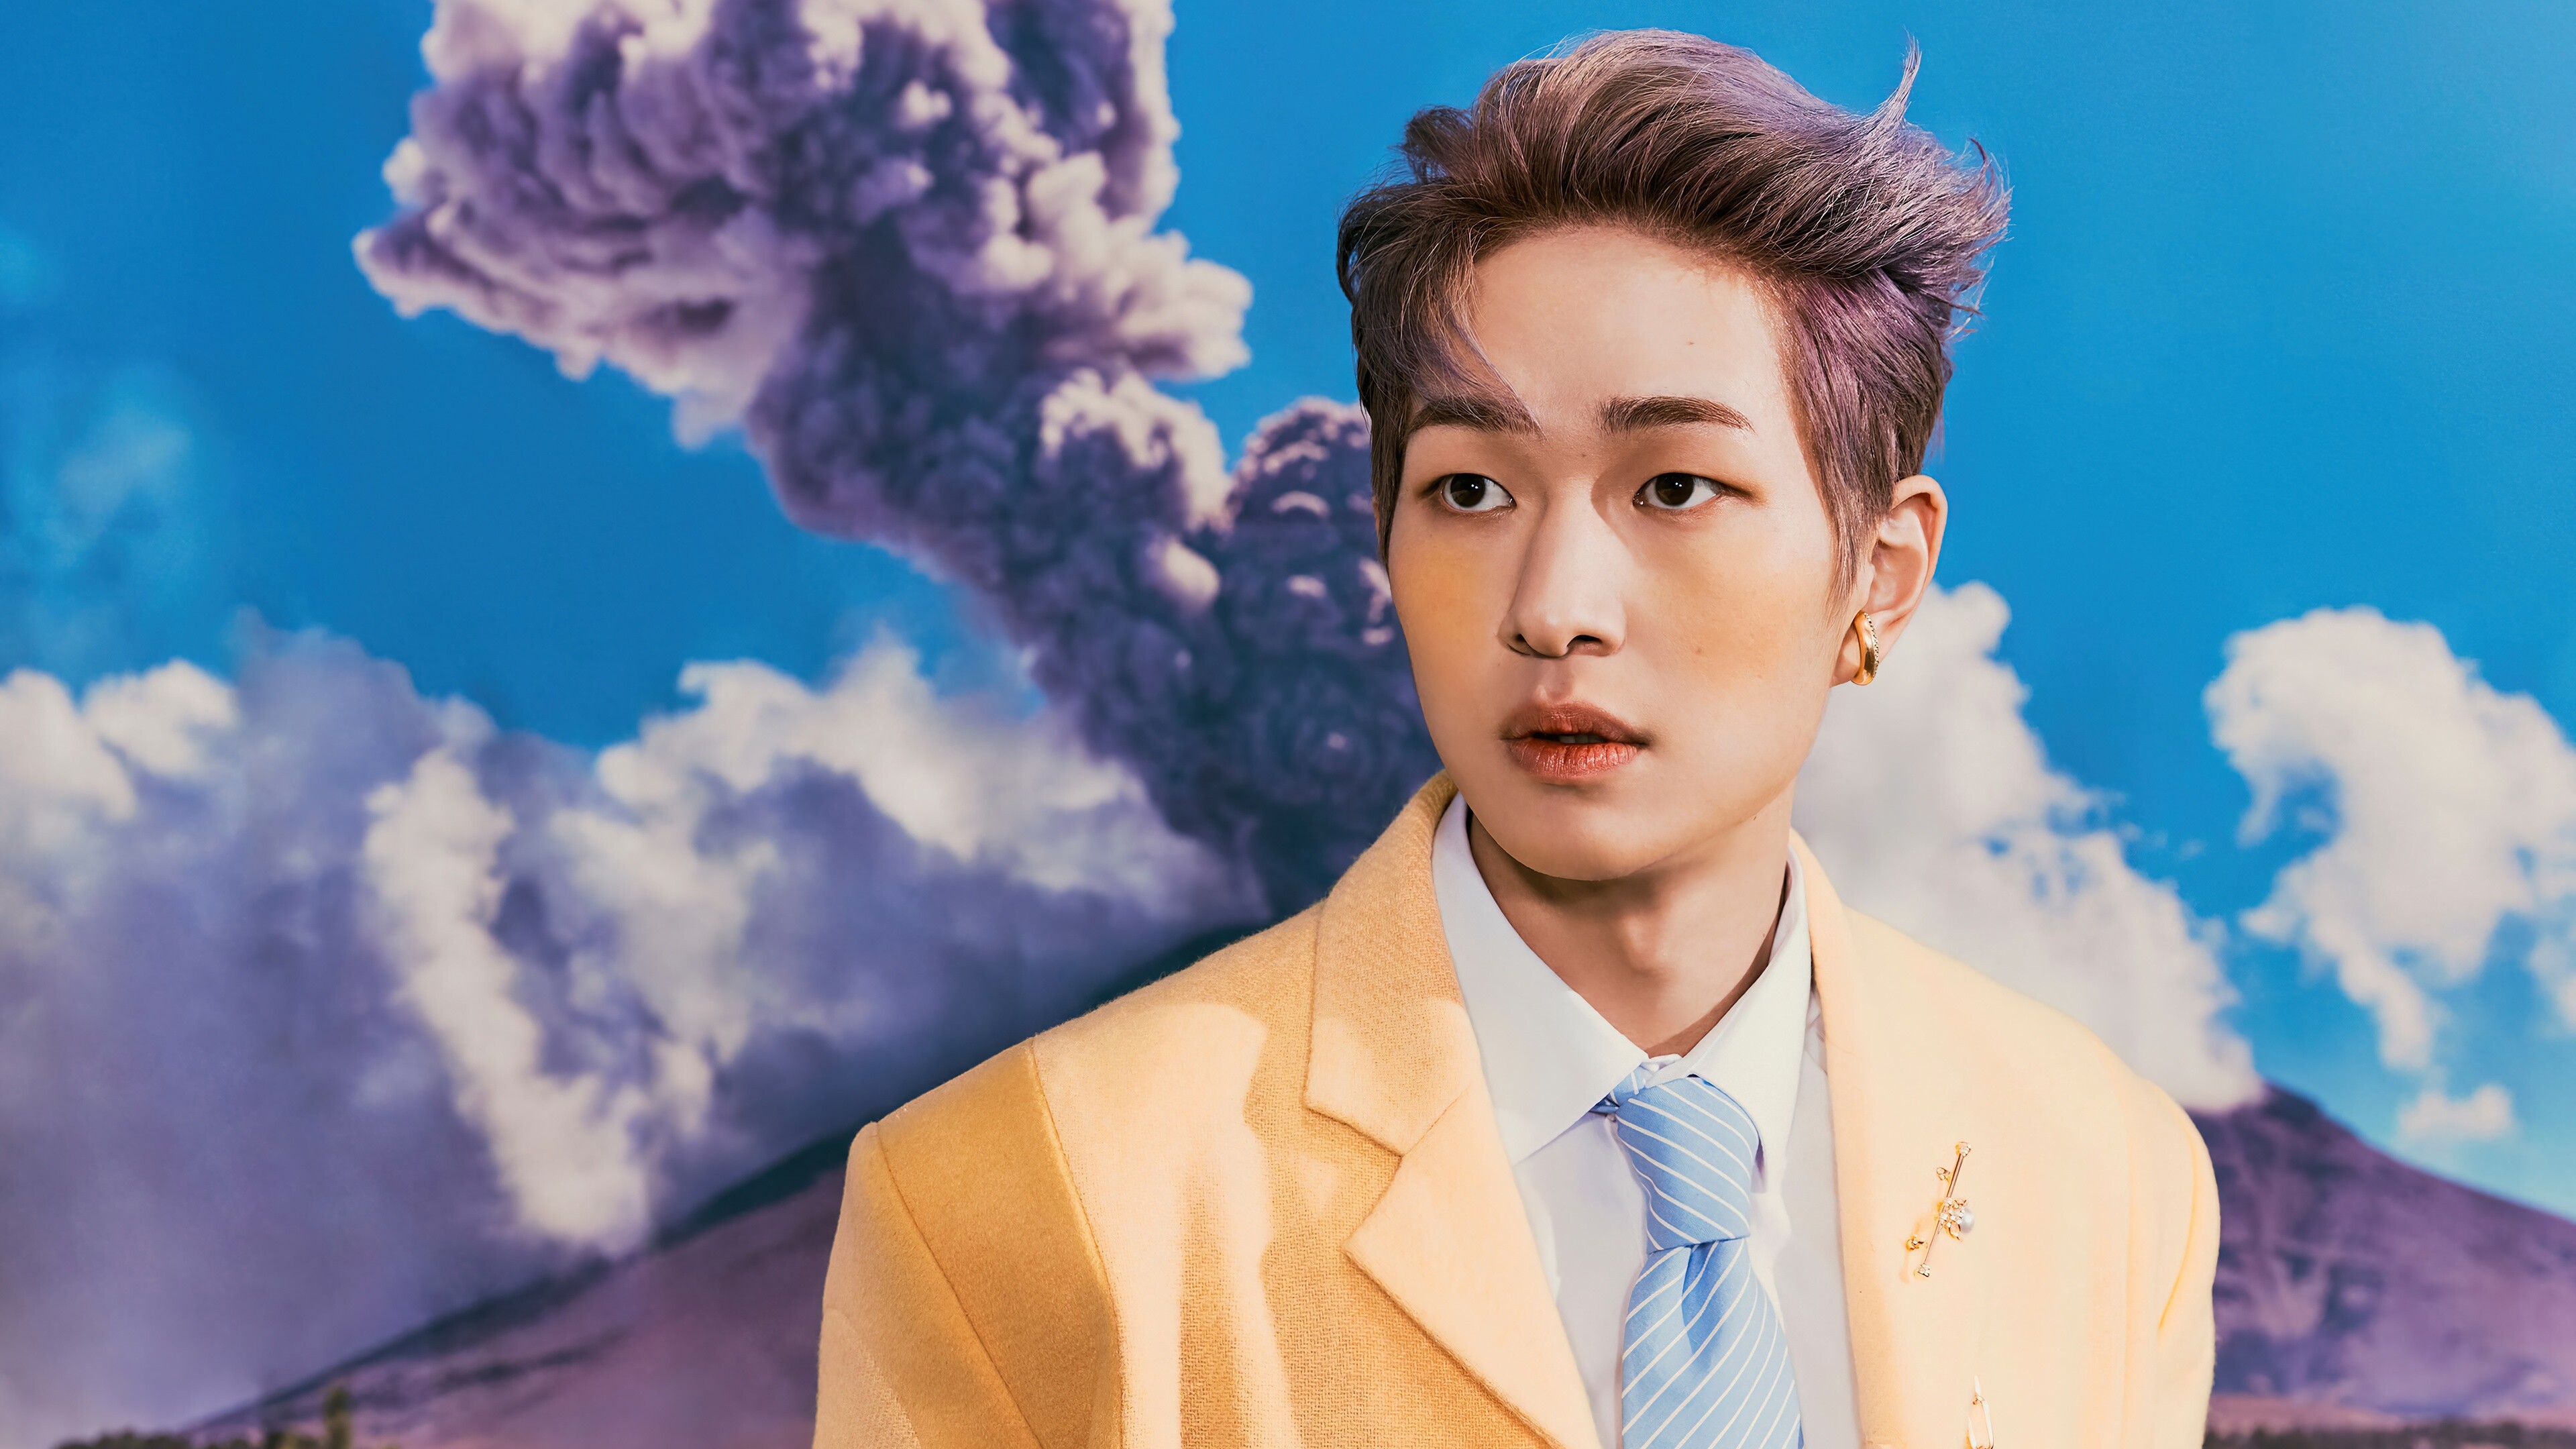 SHINee: Lee Jin-ki, better known by his stage name Onew, Don't call me. 3840x2160 4K Wallpaper.